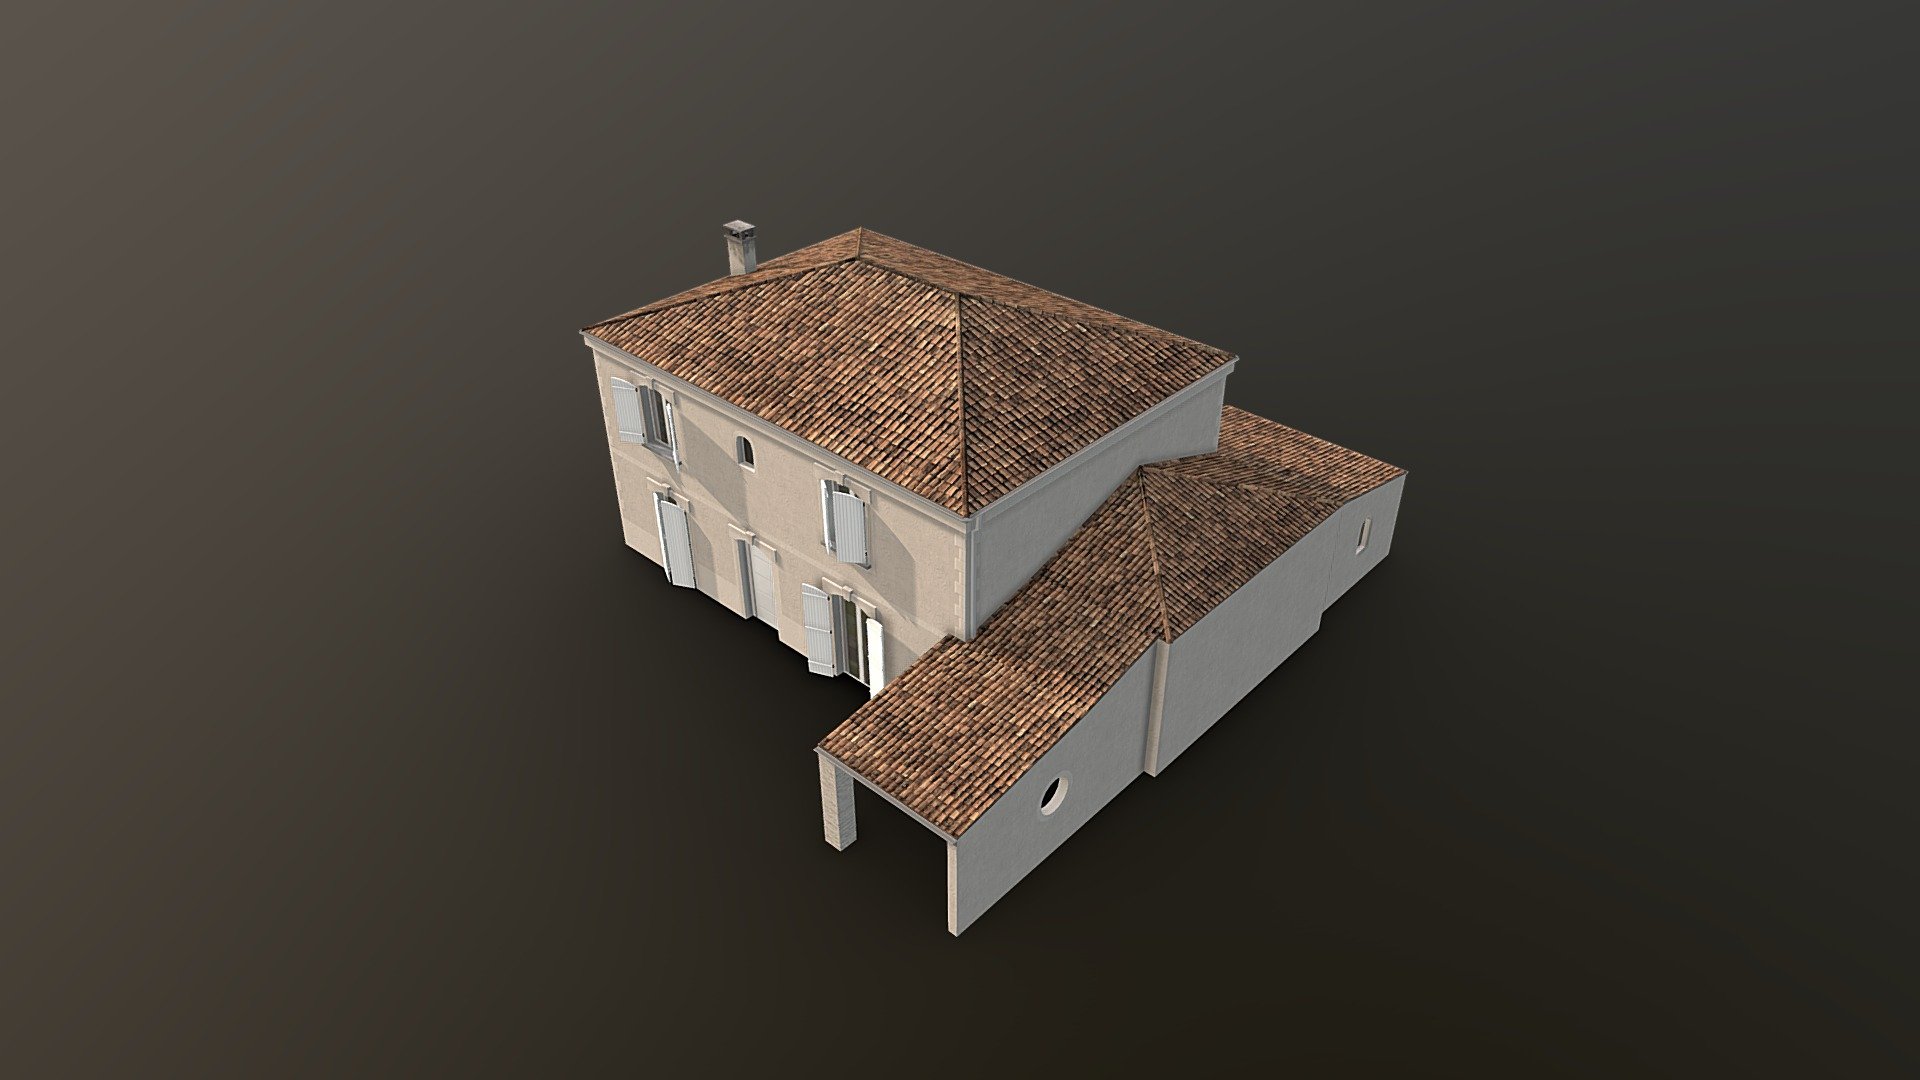 French Residential House #2
Asset for Cities: Skylines - Residential House #2 - Buy Royalty Free 3D model by Gruny (@grunystudio) 3d model